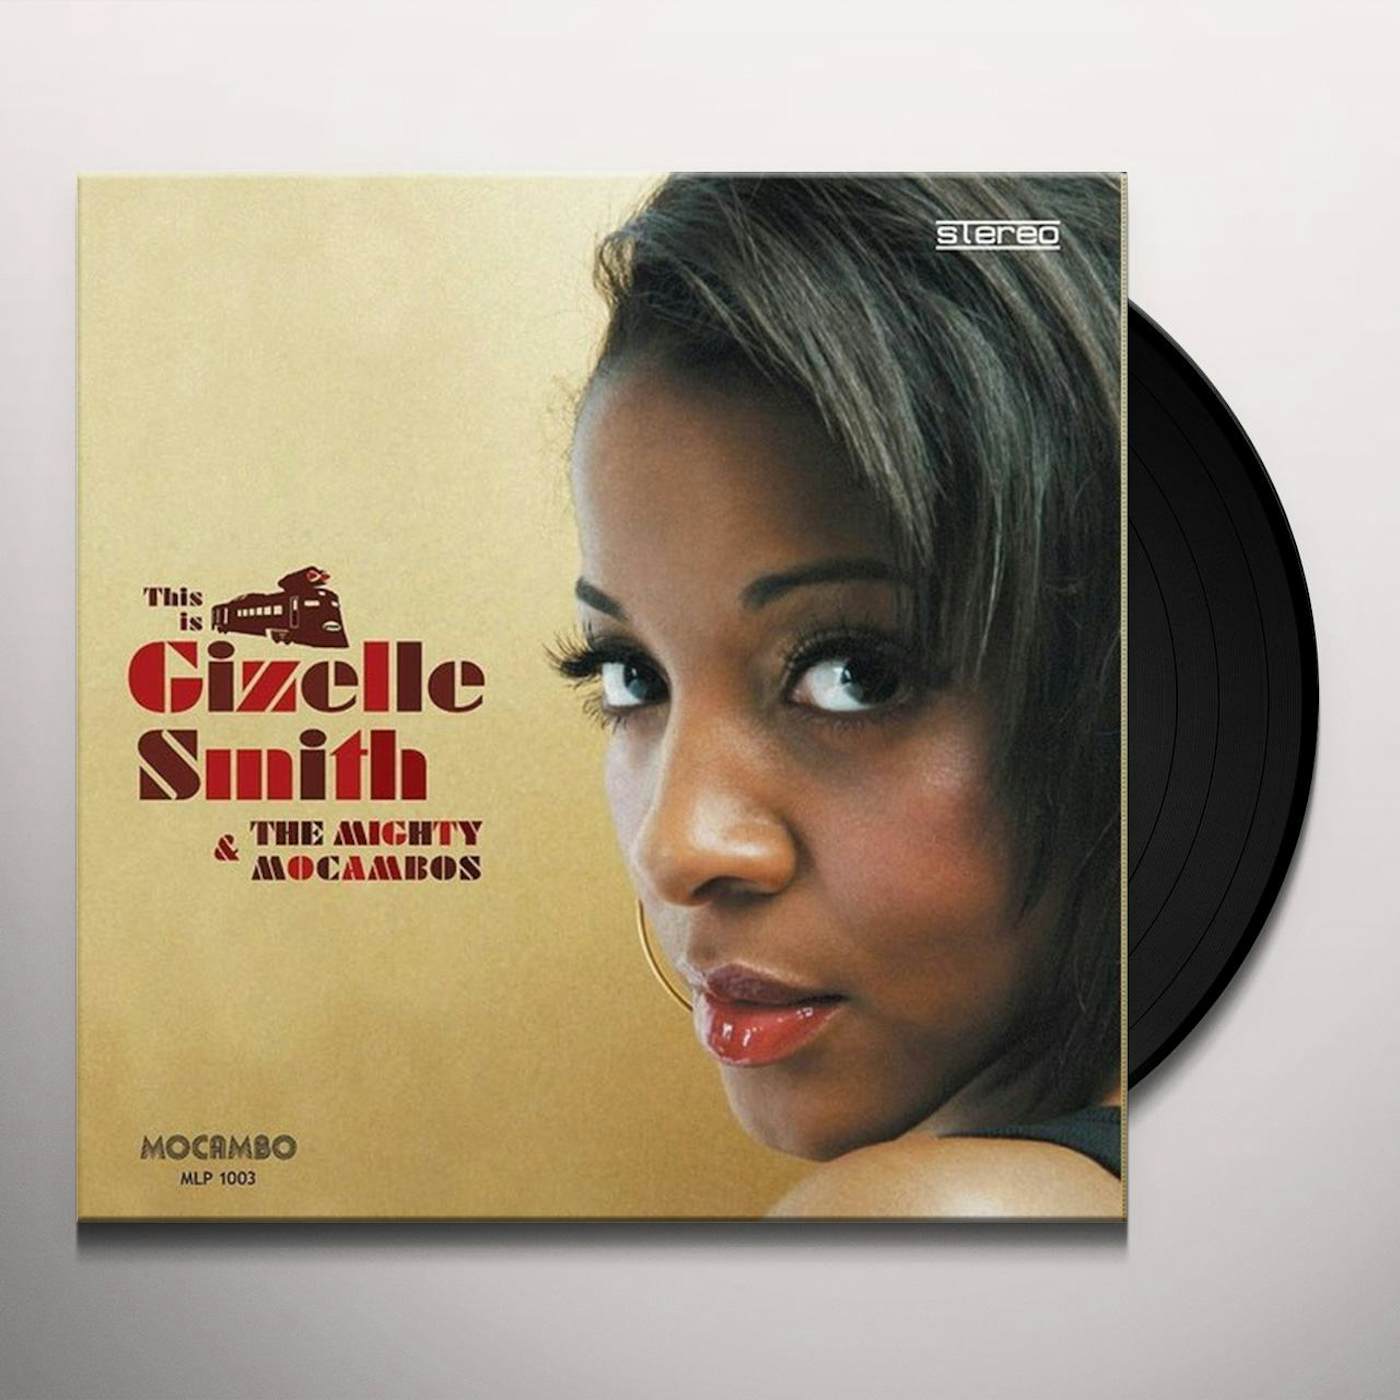 Gizelle Smith & The Mighty Mocambos